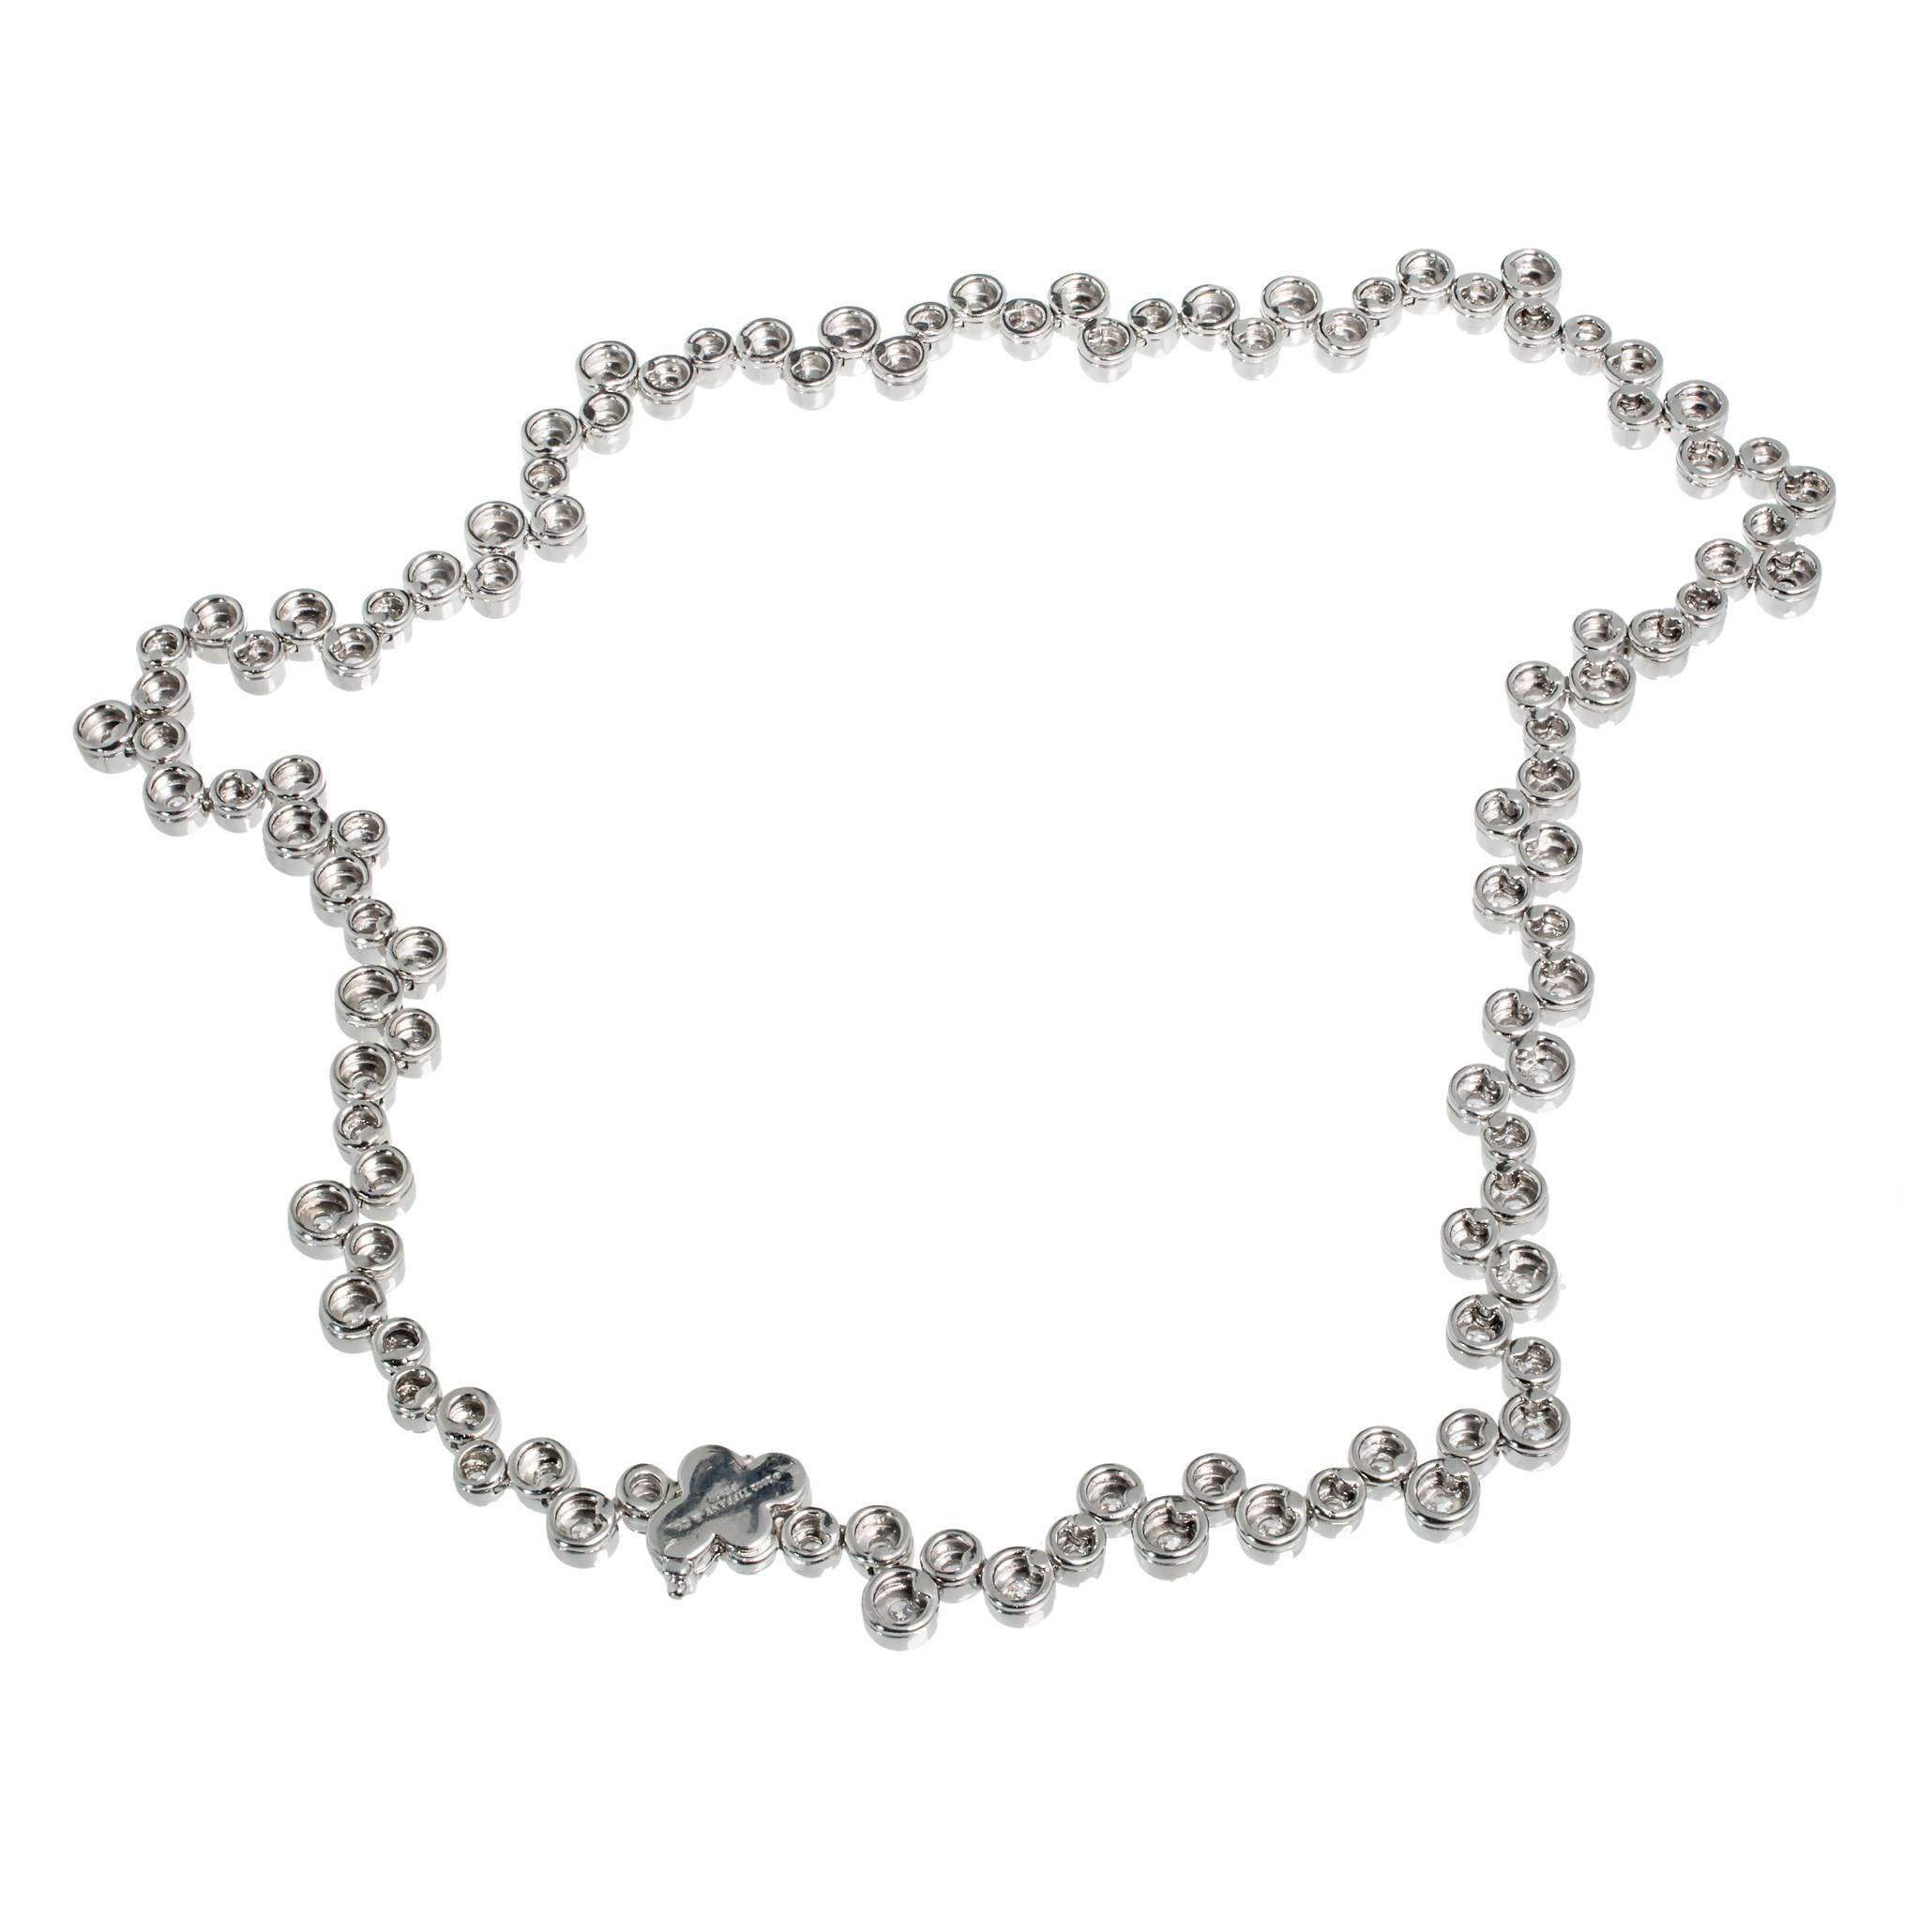 17 inch Tiffany & Co Bubbles Platinum Diamond Necklace

110 round diamonds F VS Approx total weight 8.40 cts
Platinum
Stamped: Pt950
Tested: Platinum
Hallmark: c 2002 Tiffany & Co
78.0 Grams
Total Length: 17 inch
Width: 8.18 mm
Thickness/